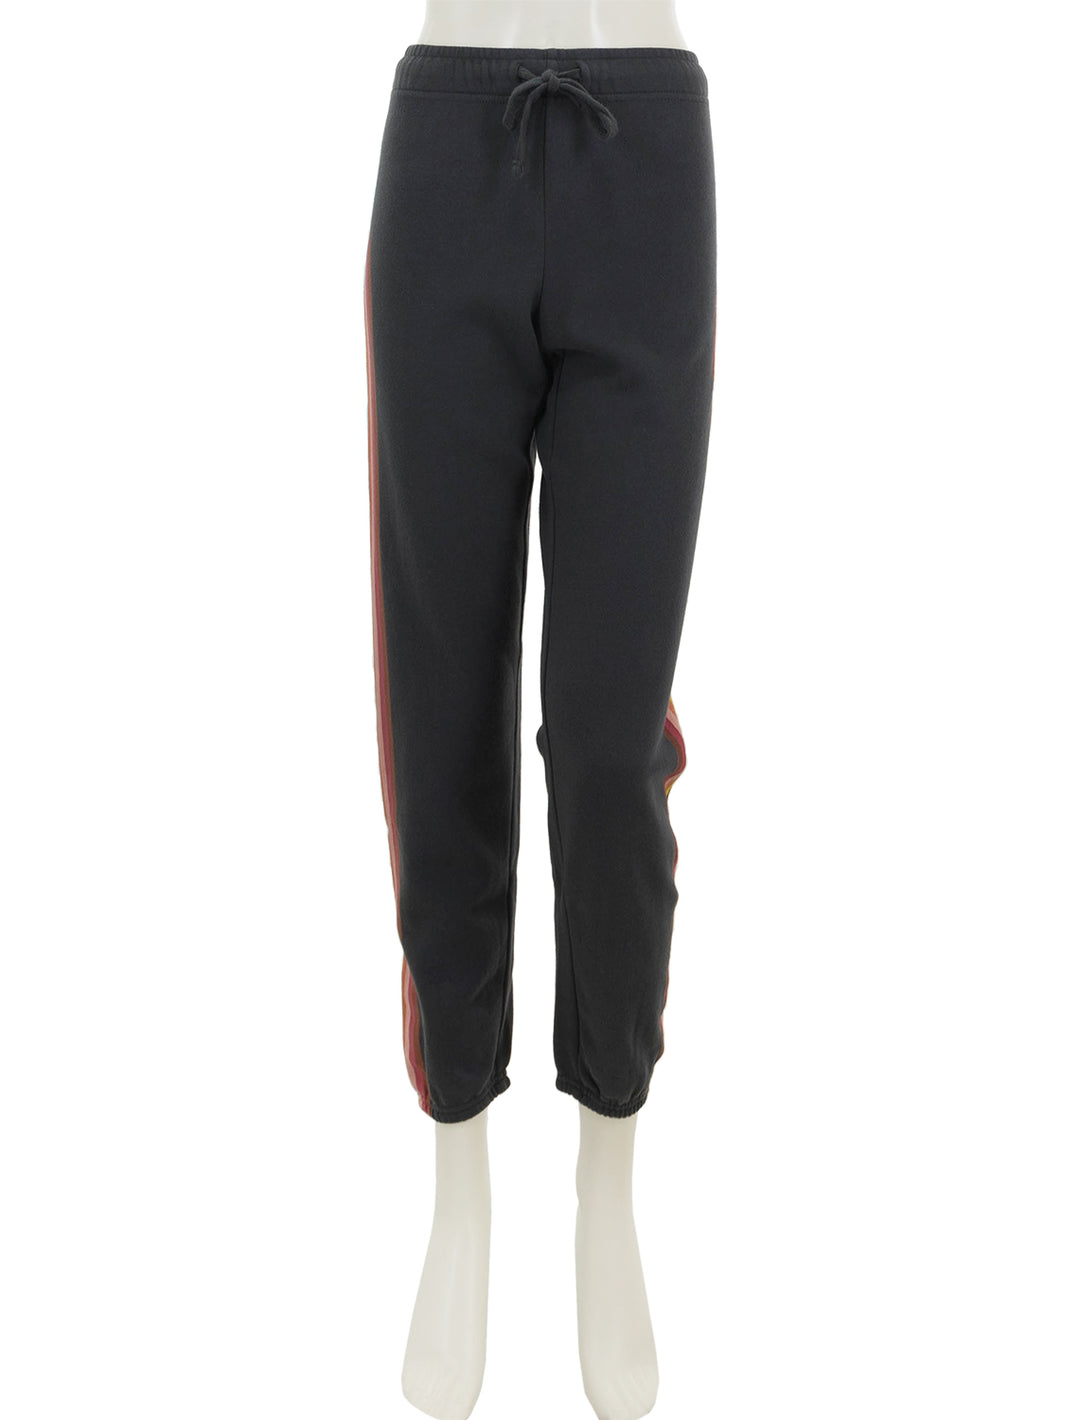 Front view of Marine Layer's anytime sweatpant in washed black.